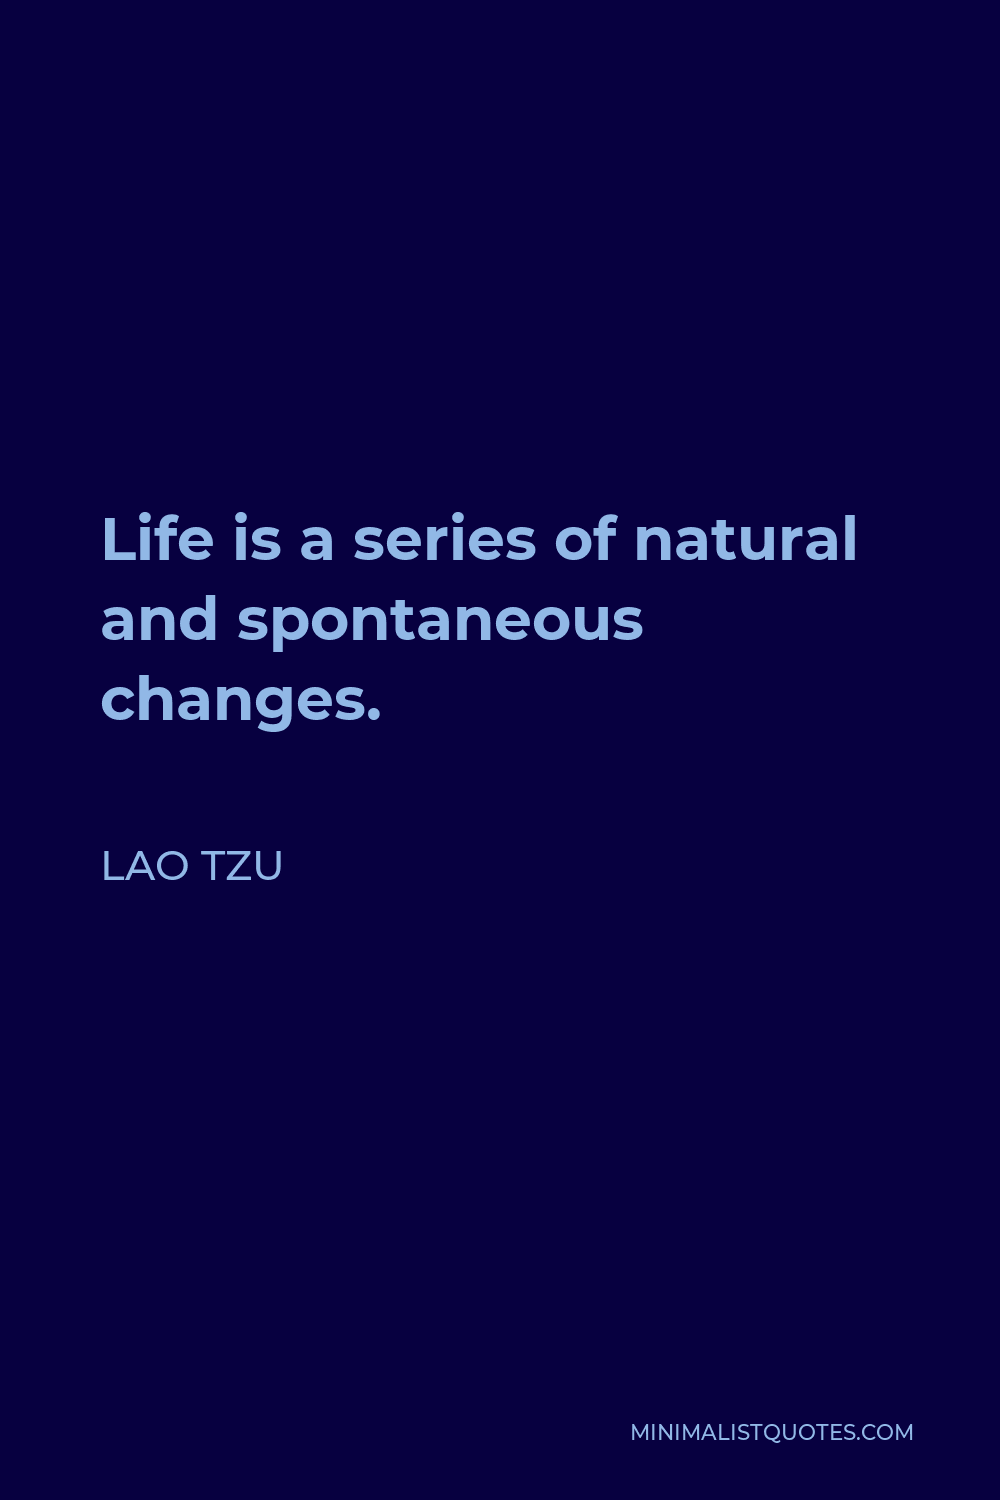 Lao Tzu Quote - Life is a series of natural and spontaneous changes.